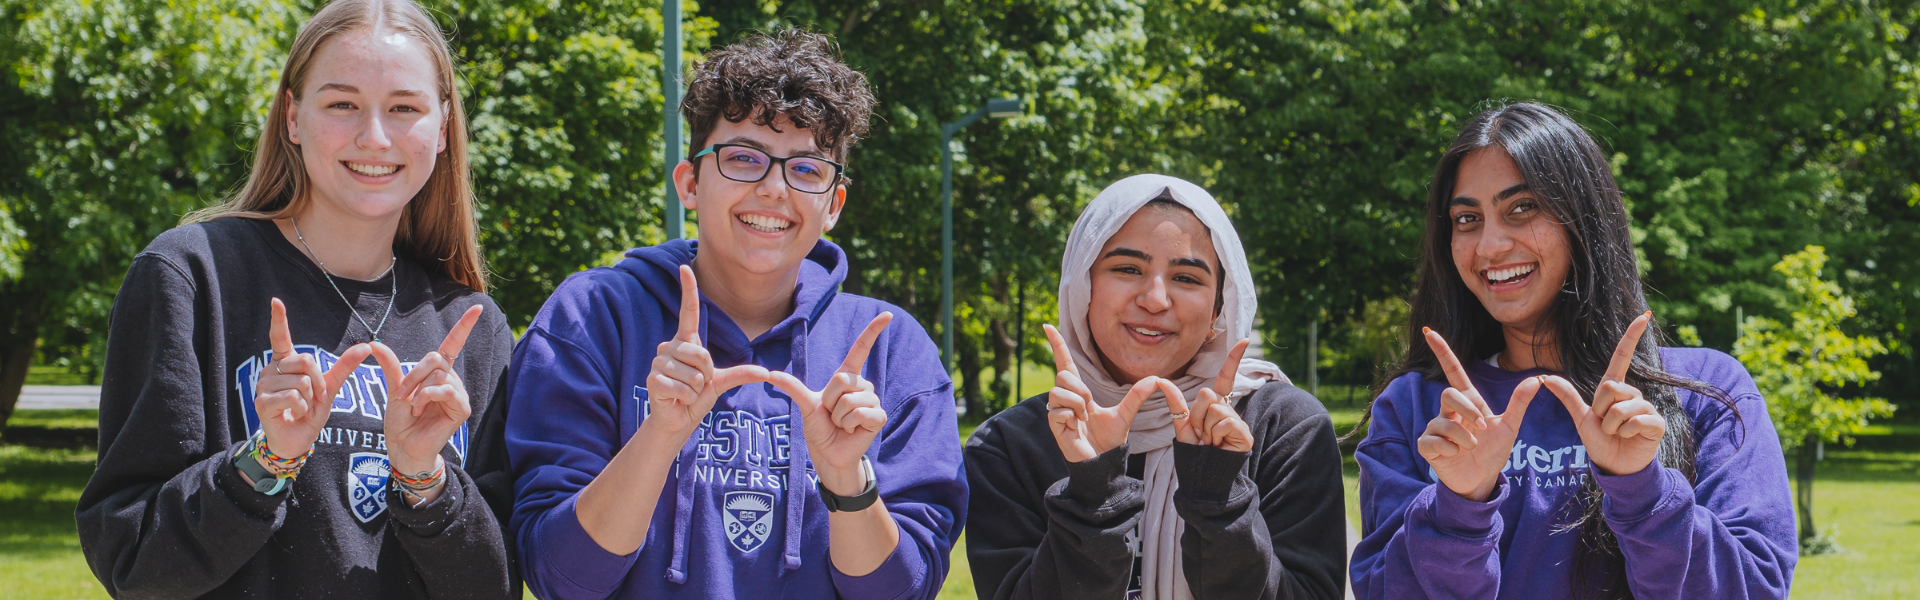 A photo of students smiling making a Western "w" with their hands